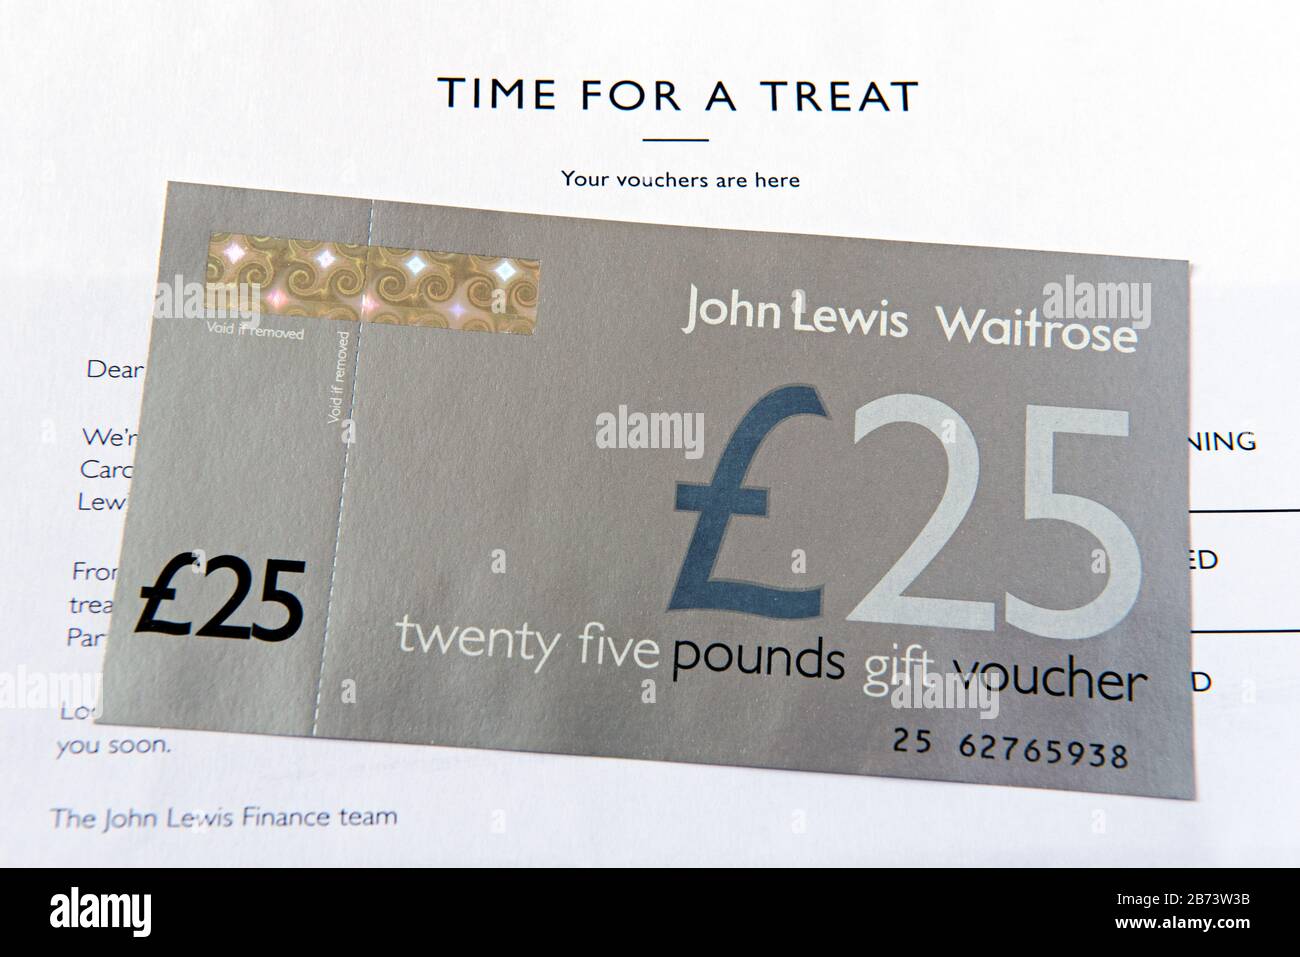 John Lewis Waitrose and Partners gift voucher to the value of £25.00 a perk for using the John Lewis credit card. Stock Photo